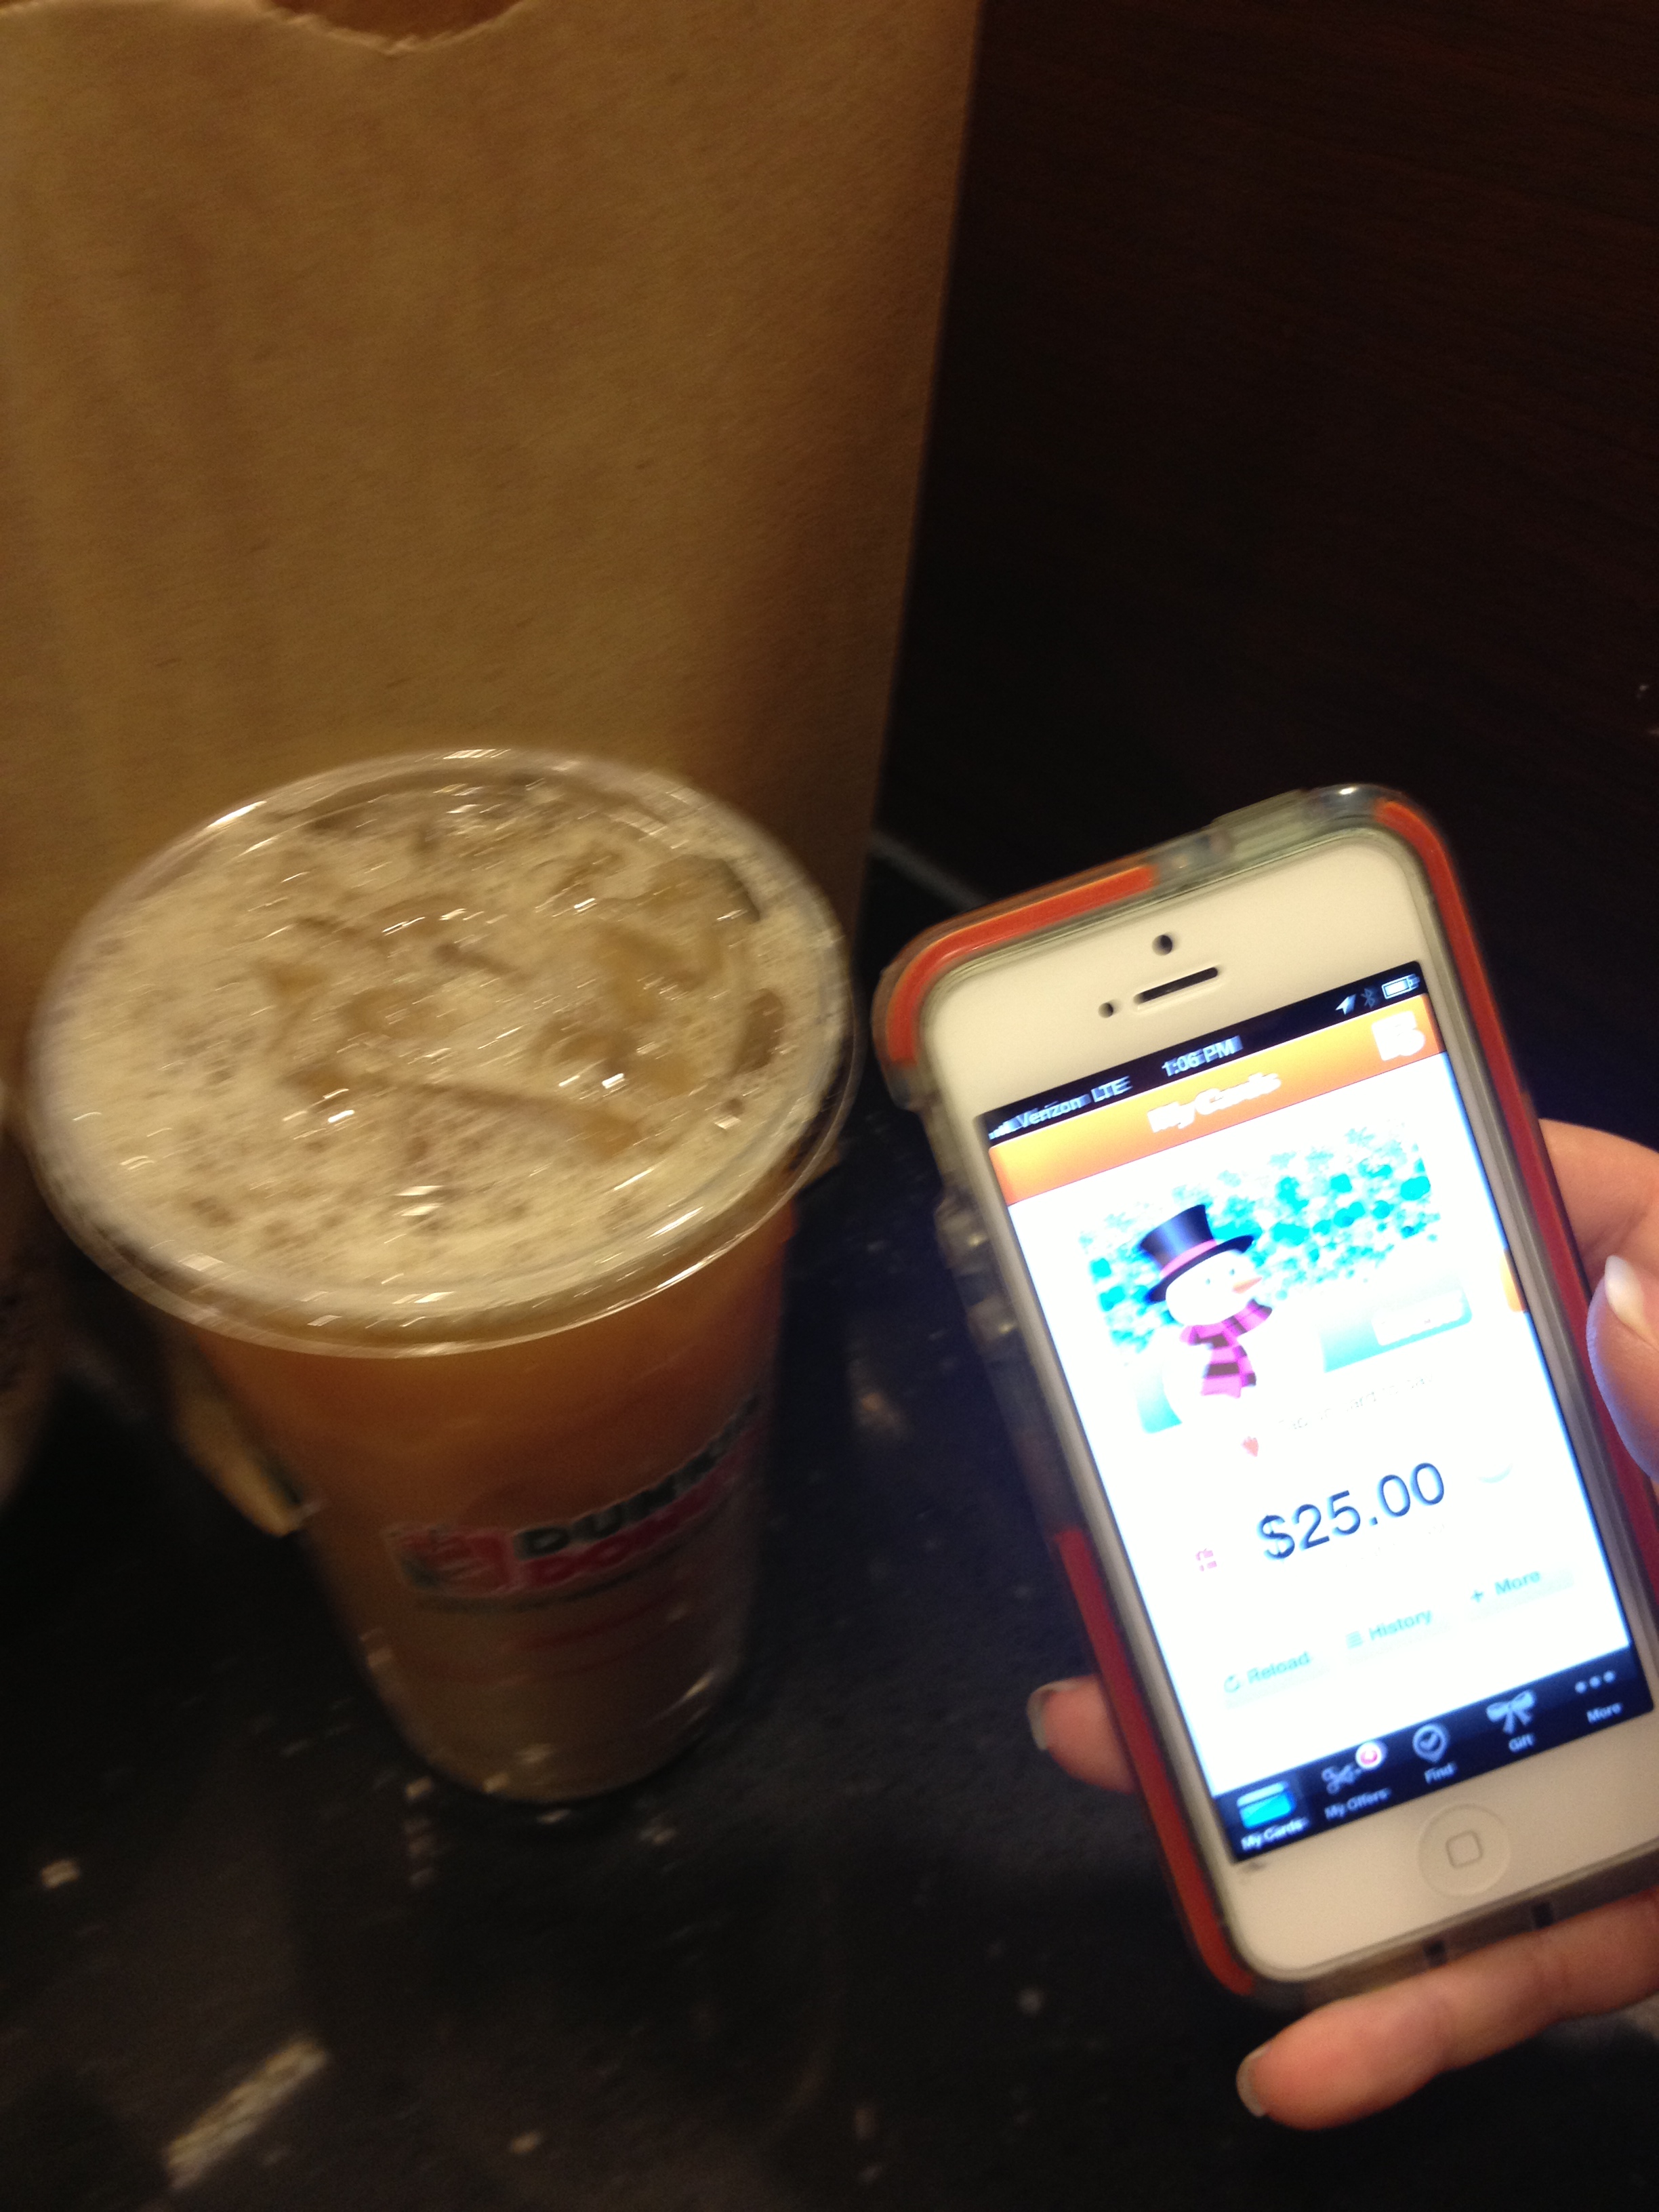 My Dunkin' Donuts Mobile App in action